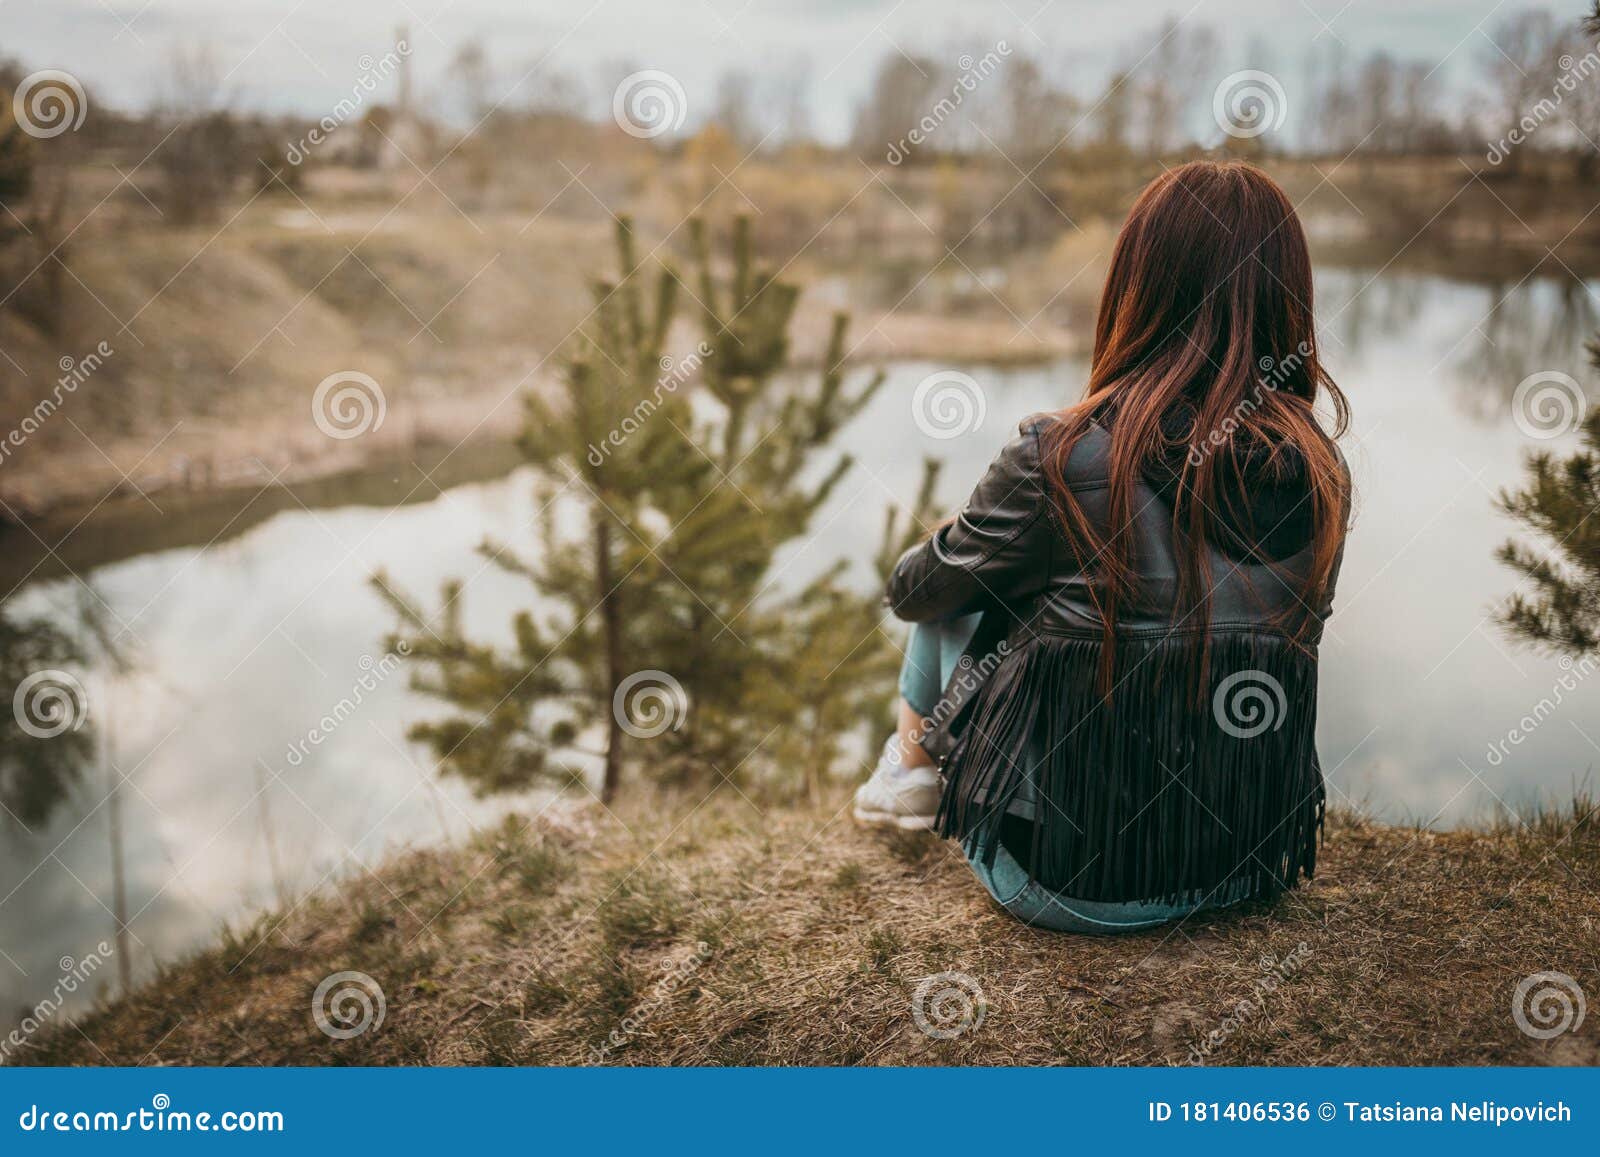 Beautiful Sad Girl Sitting On The Lake In Jeans, Looking Into The Distance  And Thinking About The Meaning Of Life. The Concept Of Stock Photo - Image  Of Gloomy, Looking: 181406536